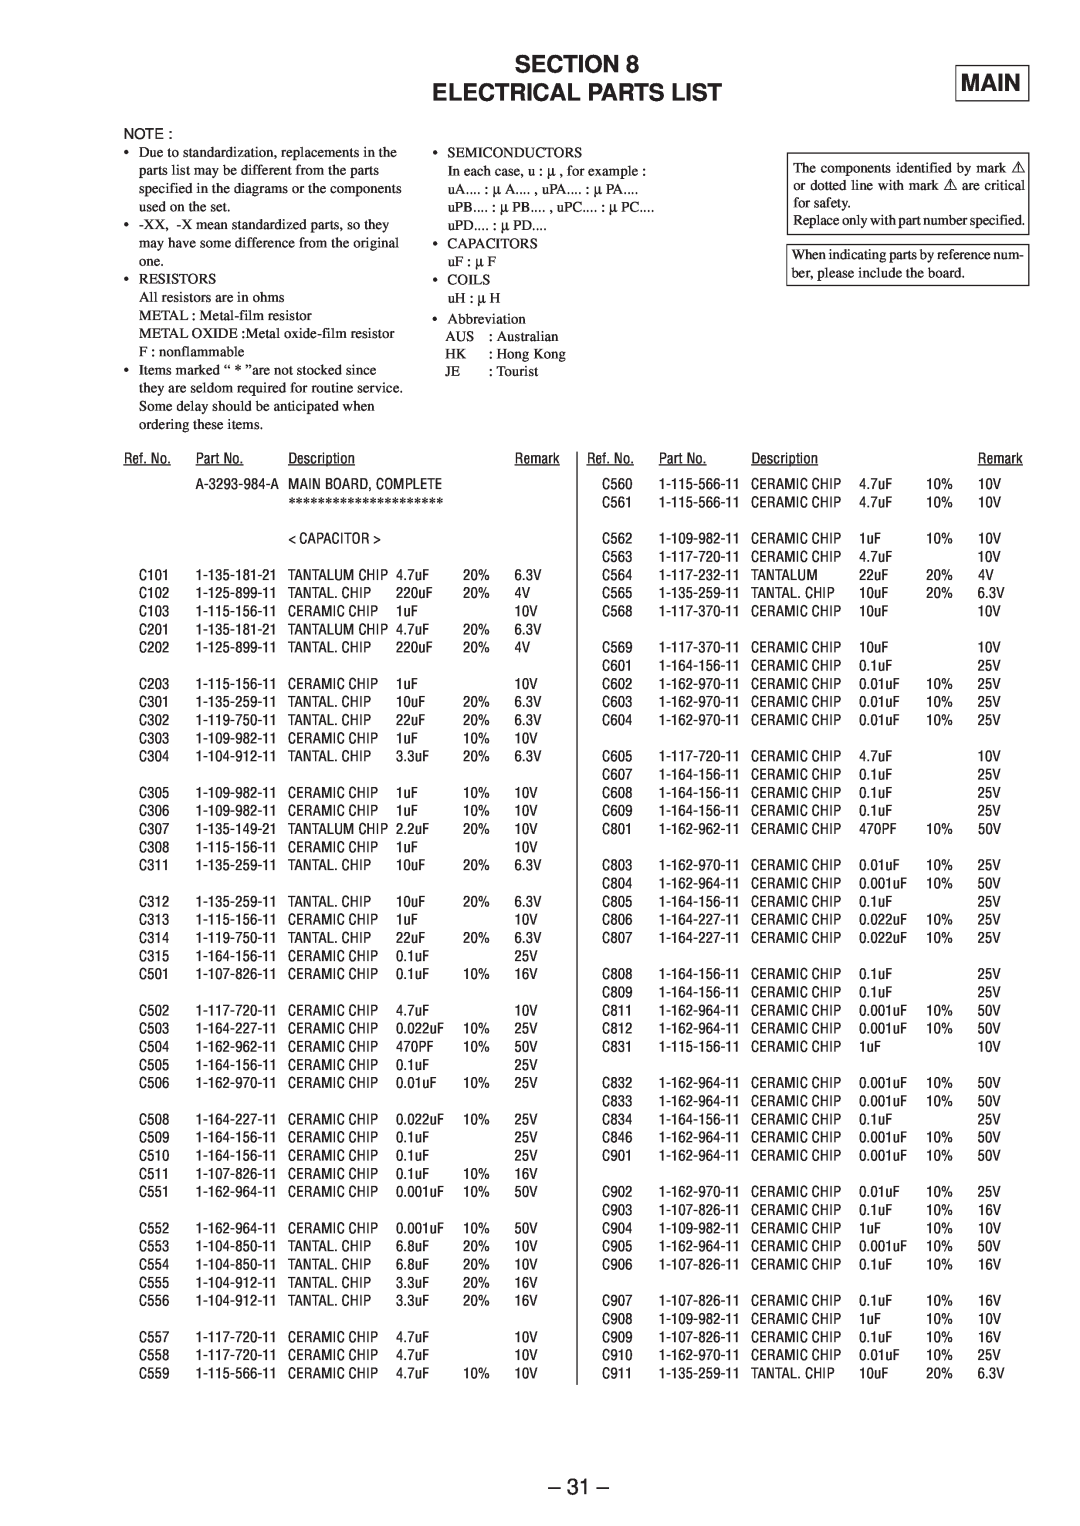 Sony MZ-E45 specifications Section Electrical Parts List, Main 